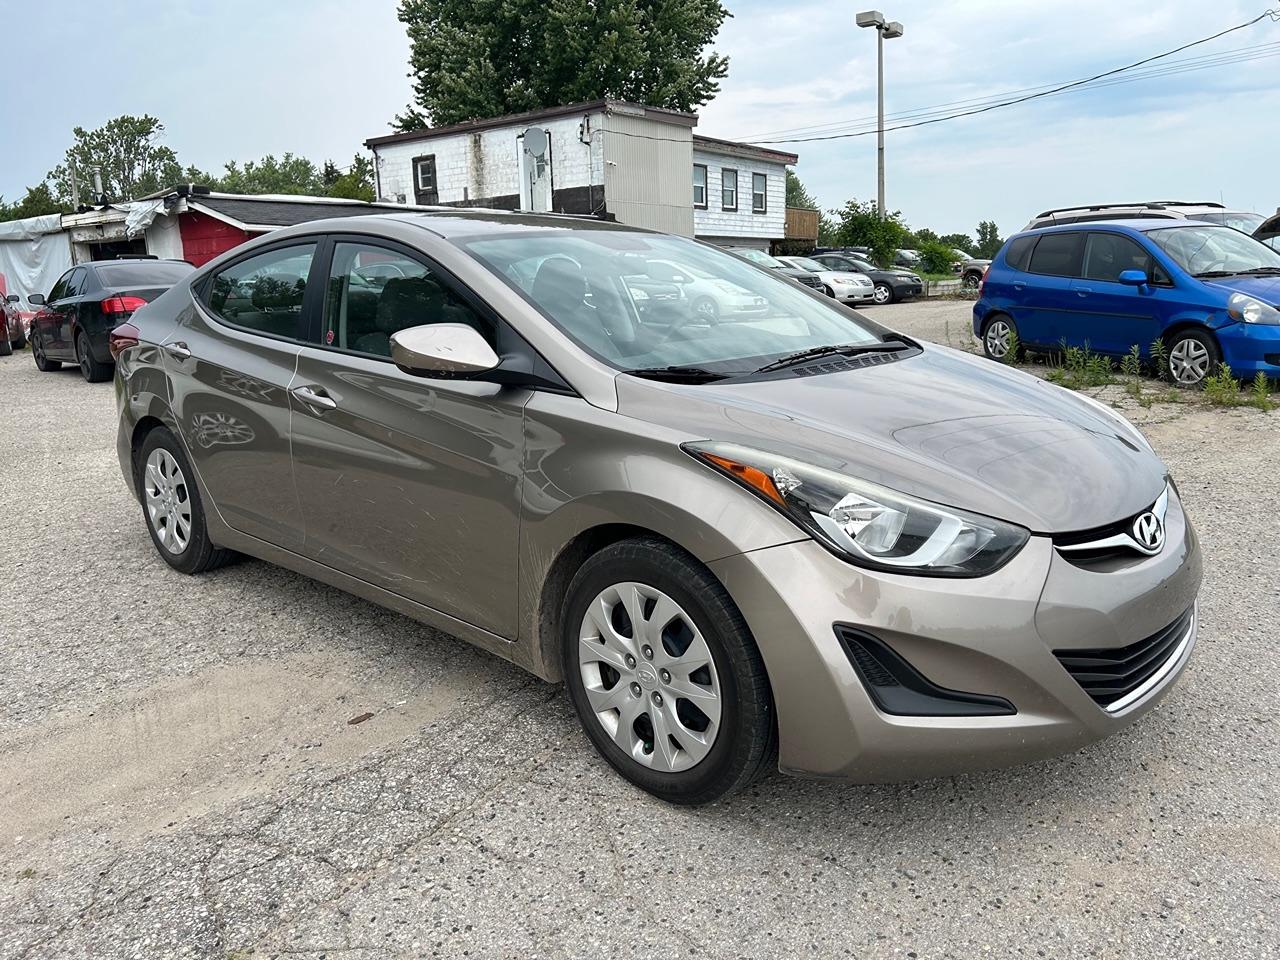 2014 Hyundai Elantra GL*EXCELLENT CONDITION*ONE OWNER*NO ACCIDENT*165K* - Photo #3